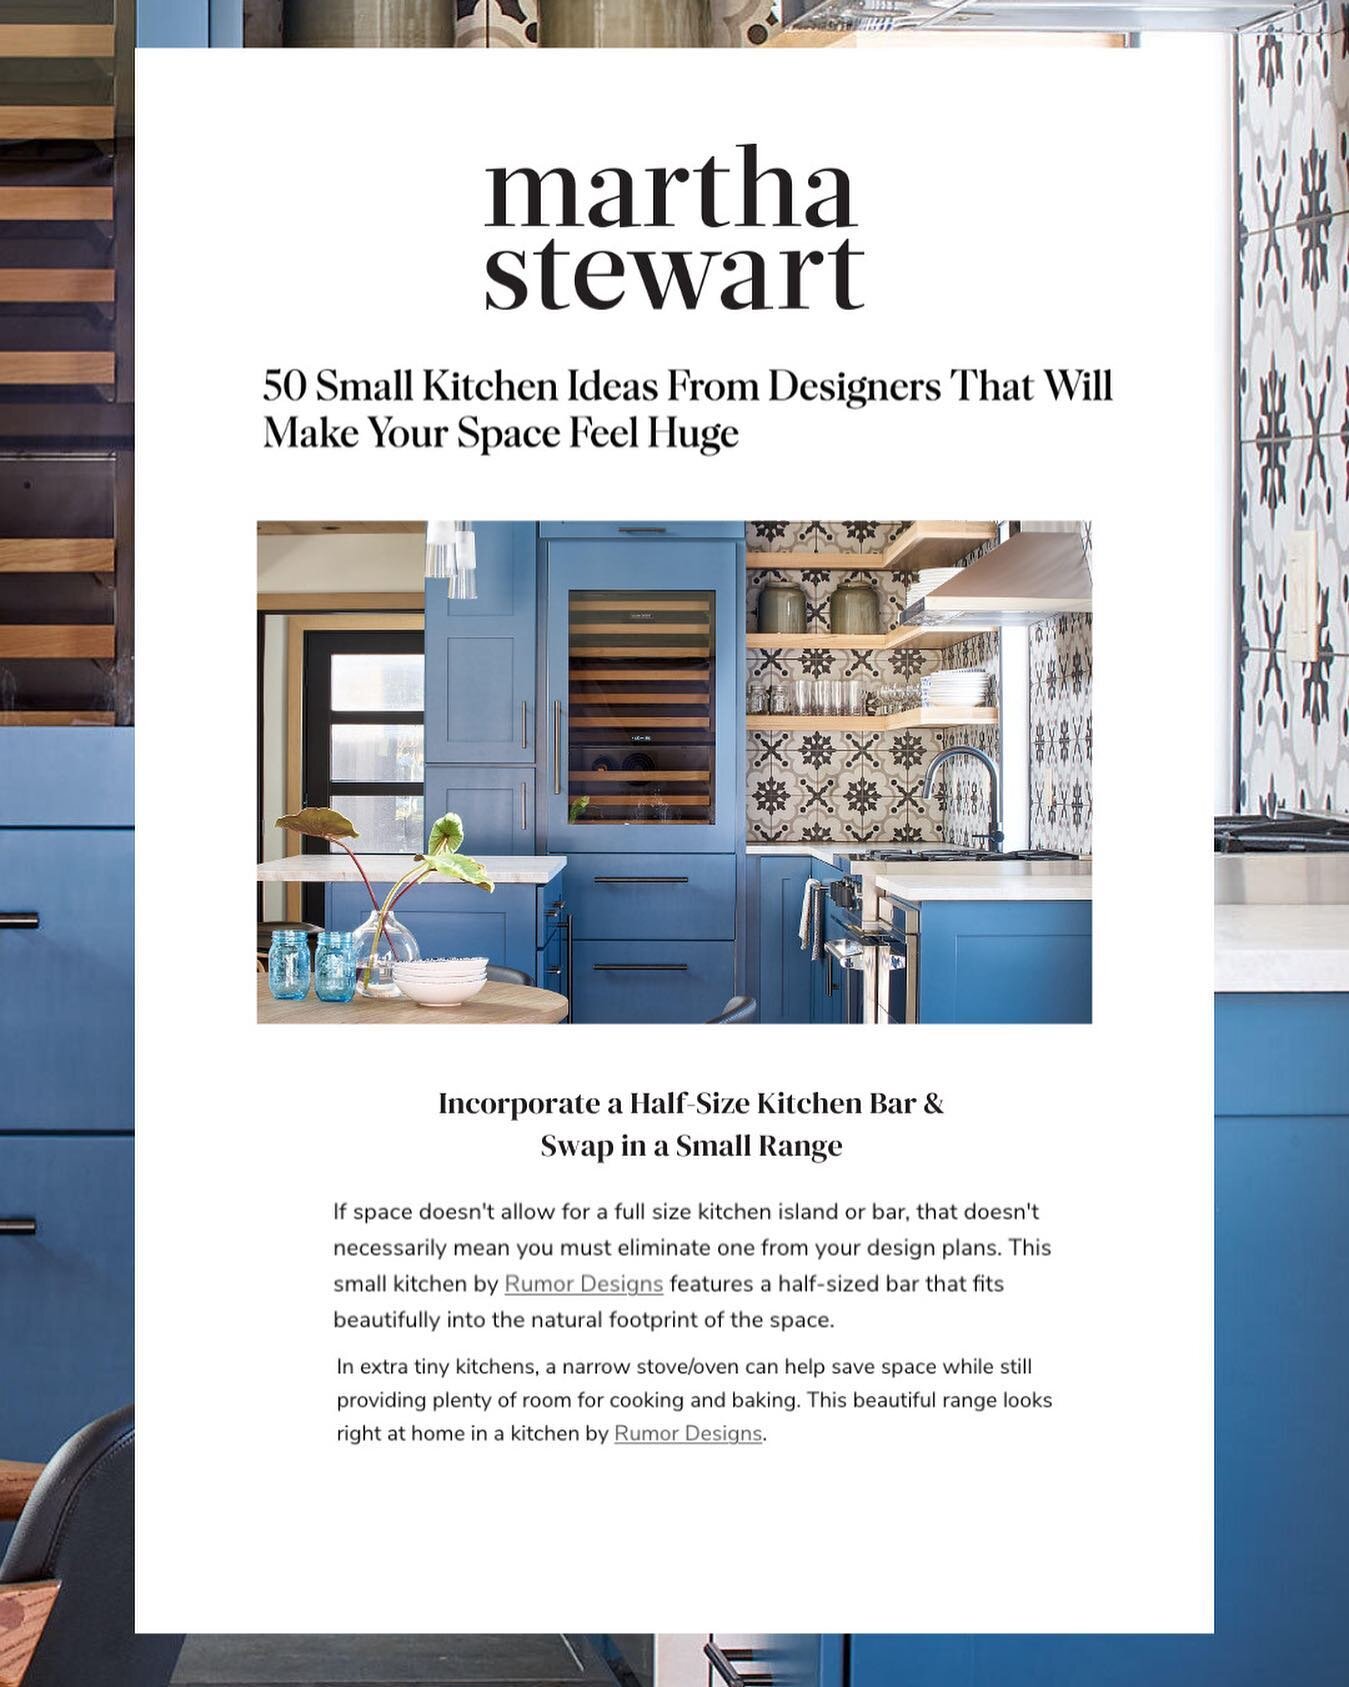 Thanks @marthastewart for highlighting small kitchen design. 
⠀⠀⠀⠀⠀⠀⠀⠀⠀
&quot;In extra tiny kitchens, a narrow stove/oven can help save space while still providing plenty of room for cooking and baking. This beautiful range looks right at home in a k